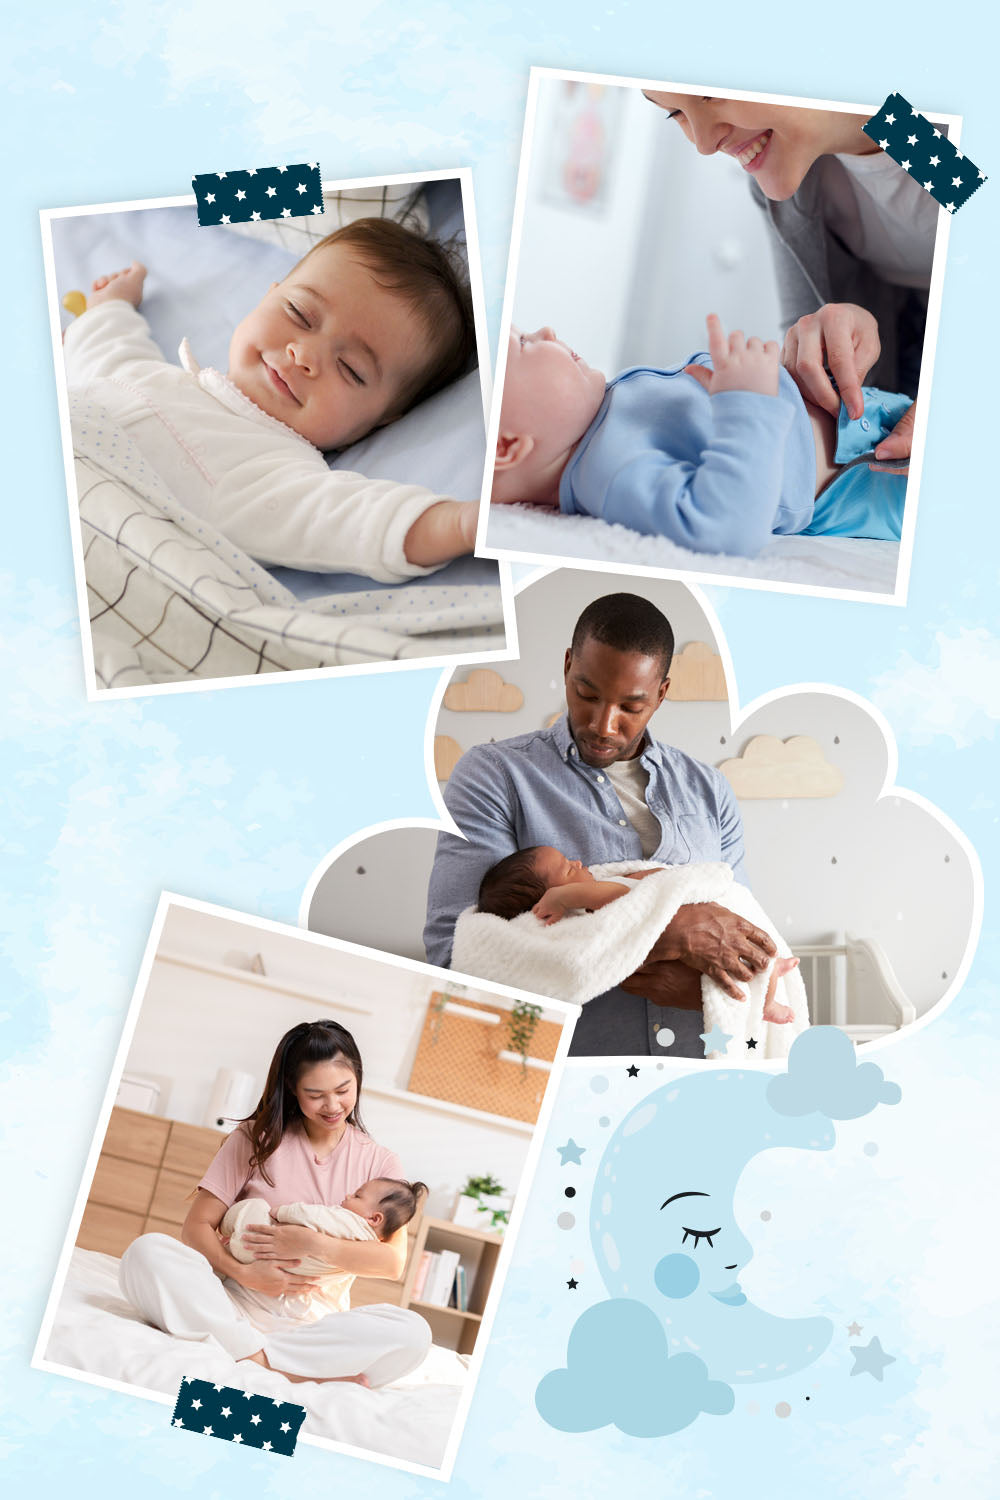 Various photo album styled images showing mothers and babies showing sleeping techniques